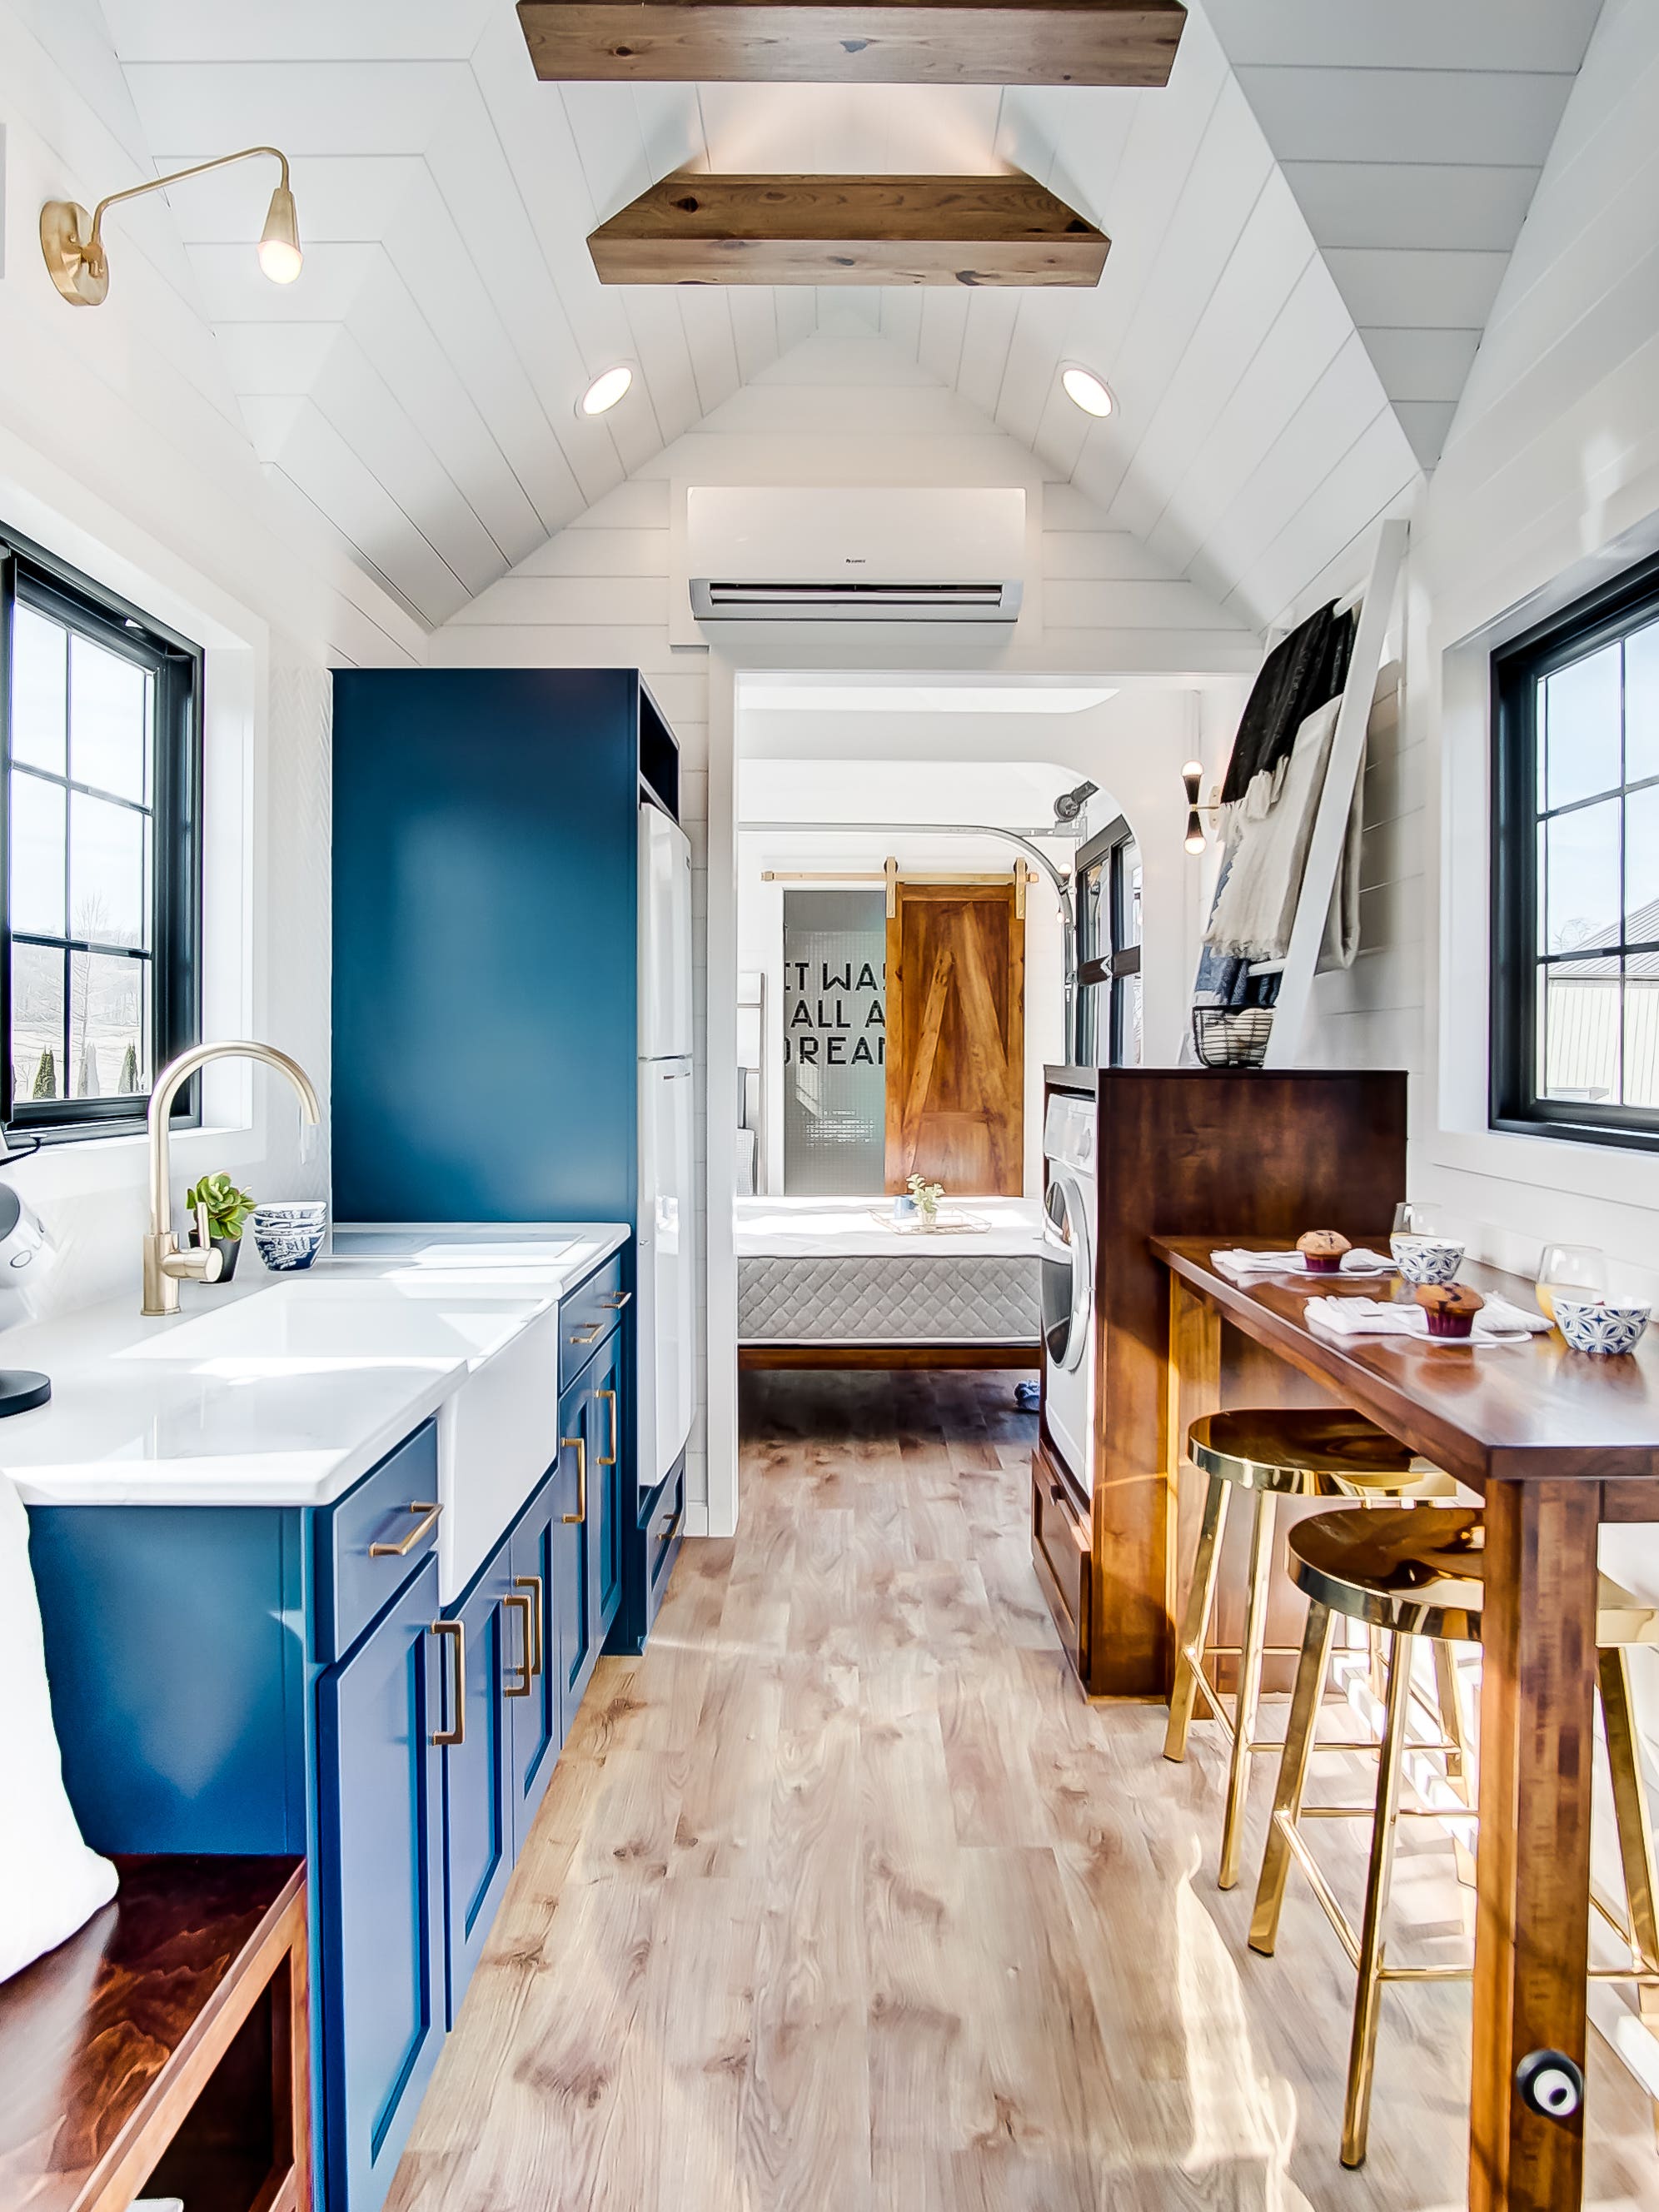 This Tiny House Squeezes Our Dream Kitchen and Shower Into 240 Square Feet